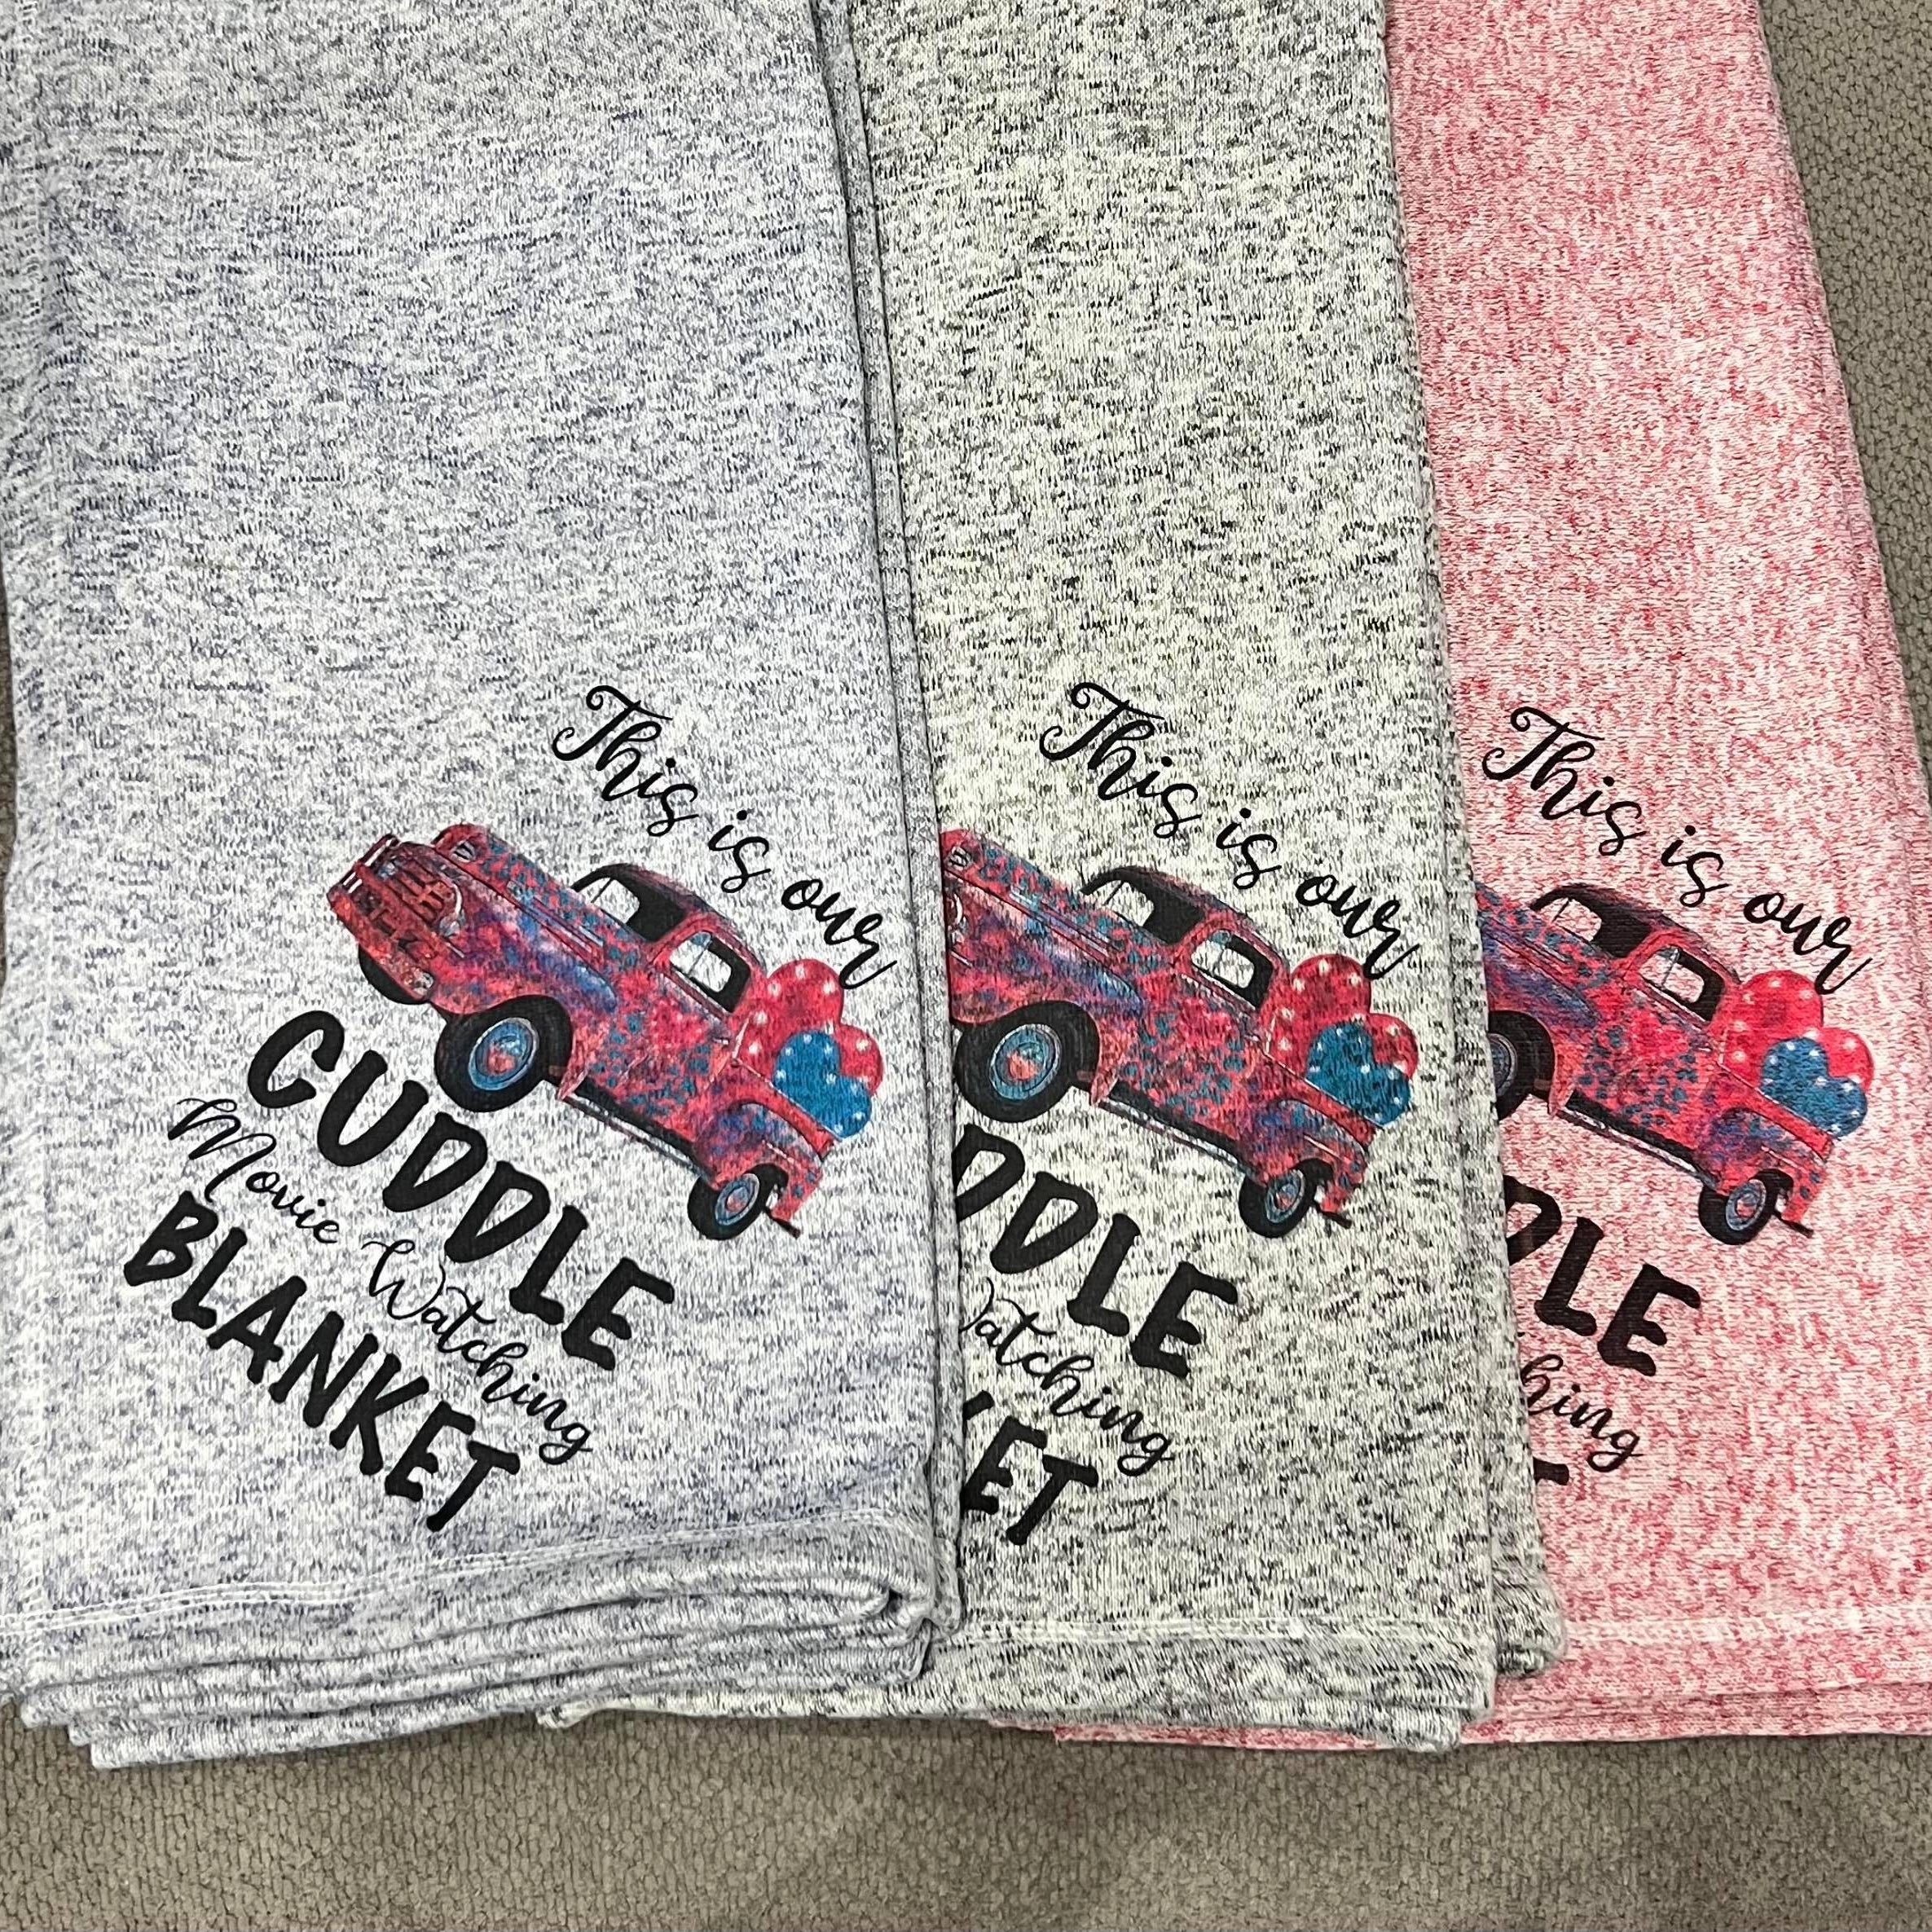 This is my Cuddle Movie watching Blanket - Signastyle Boutique